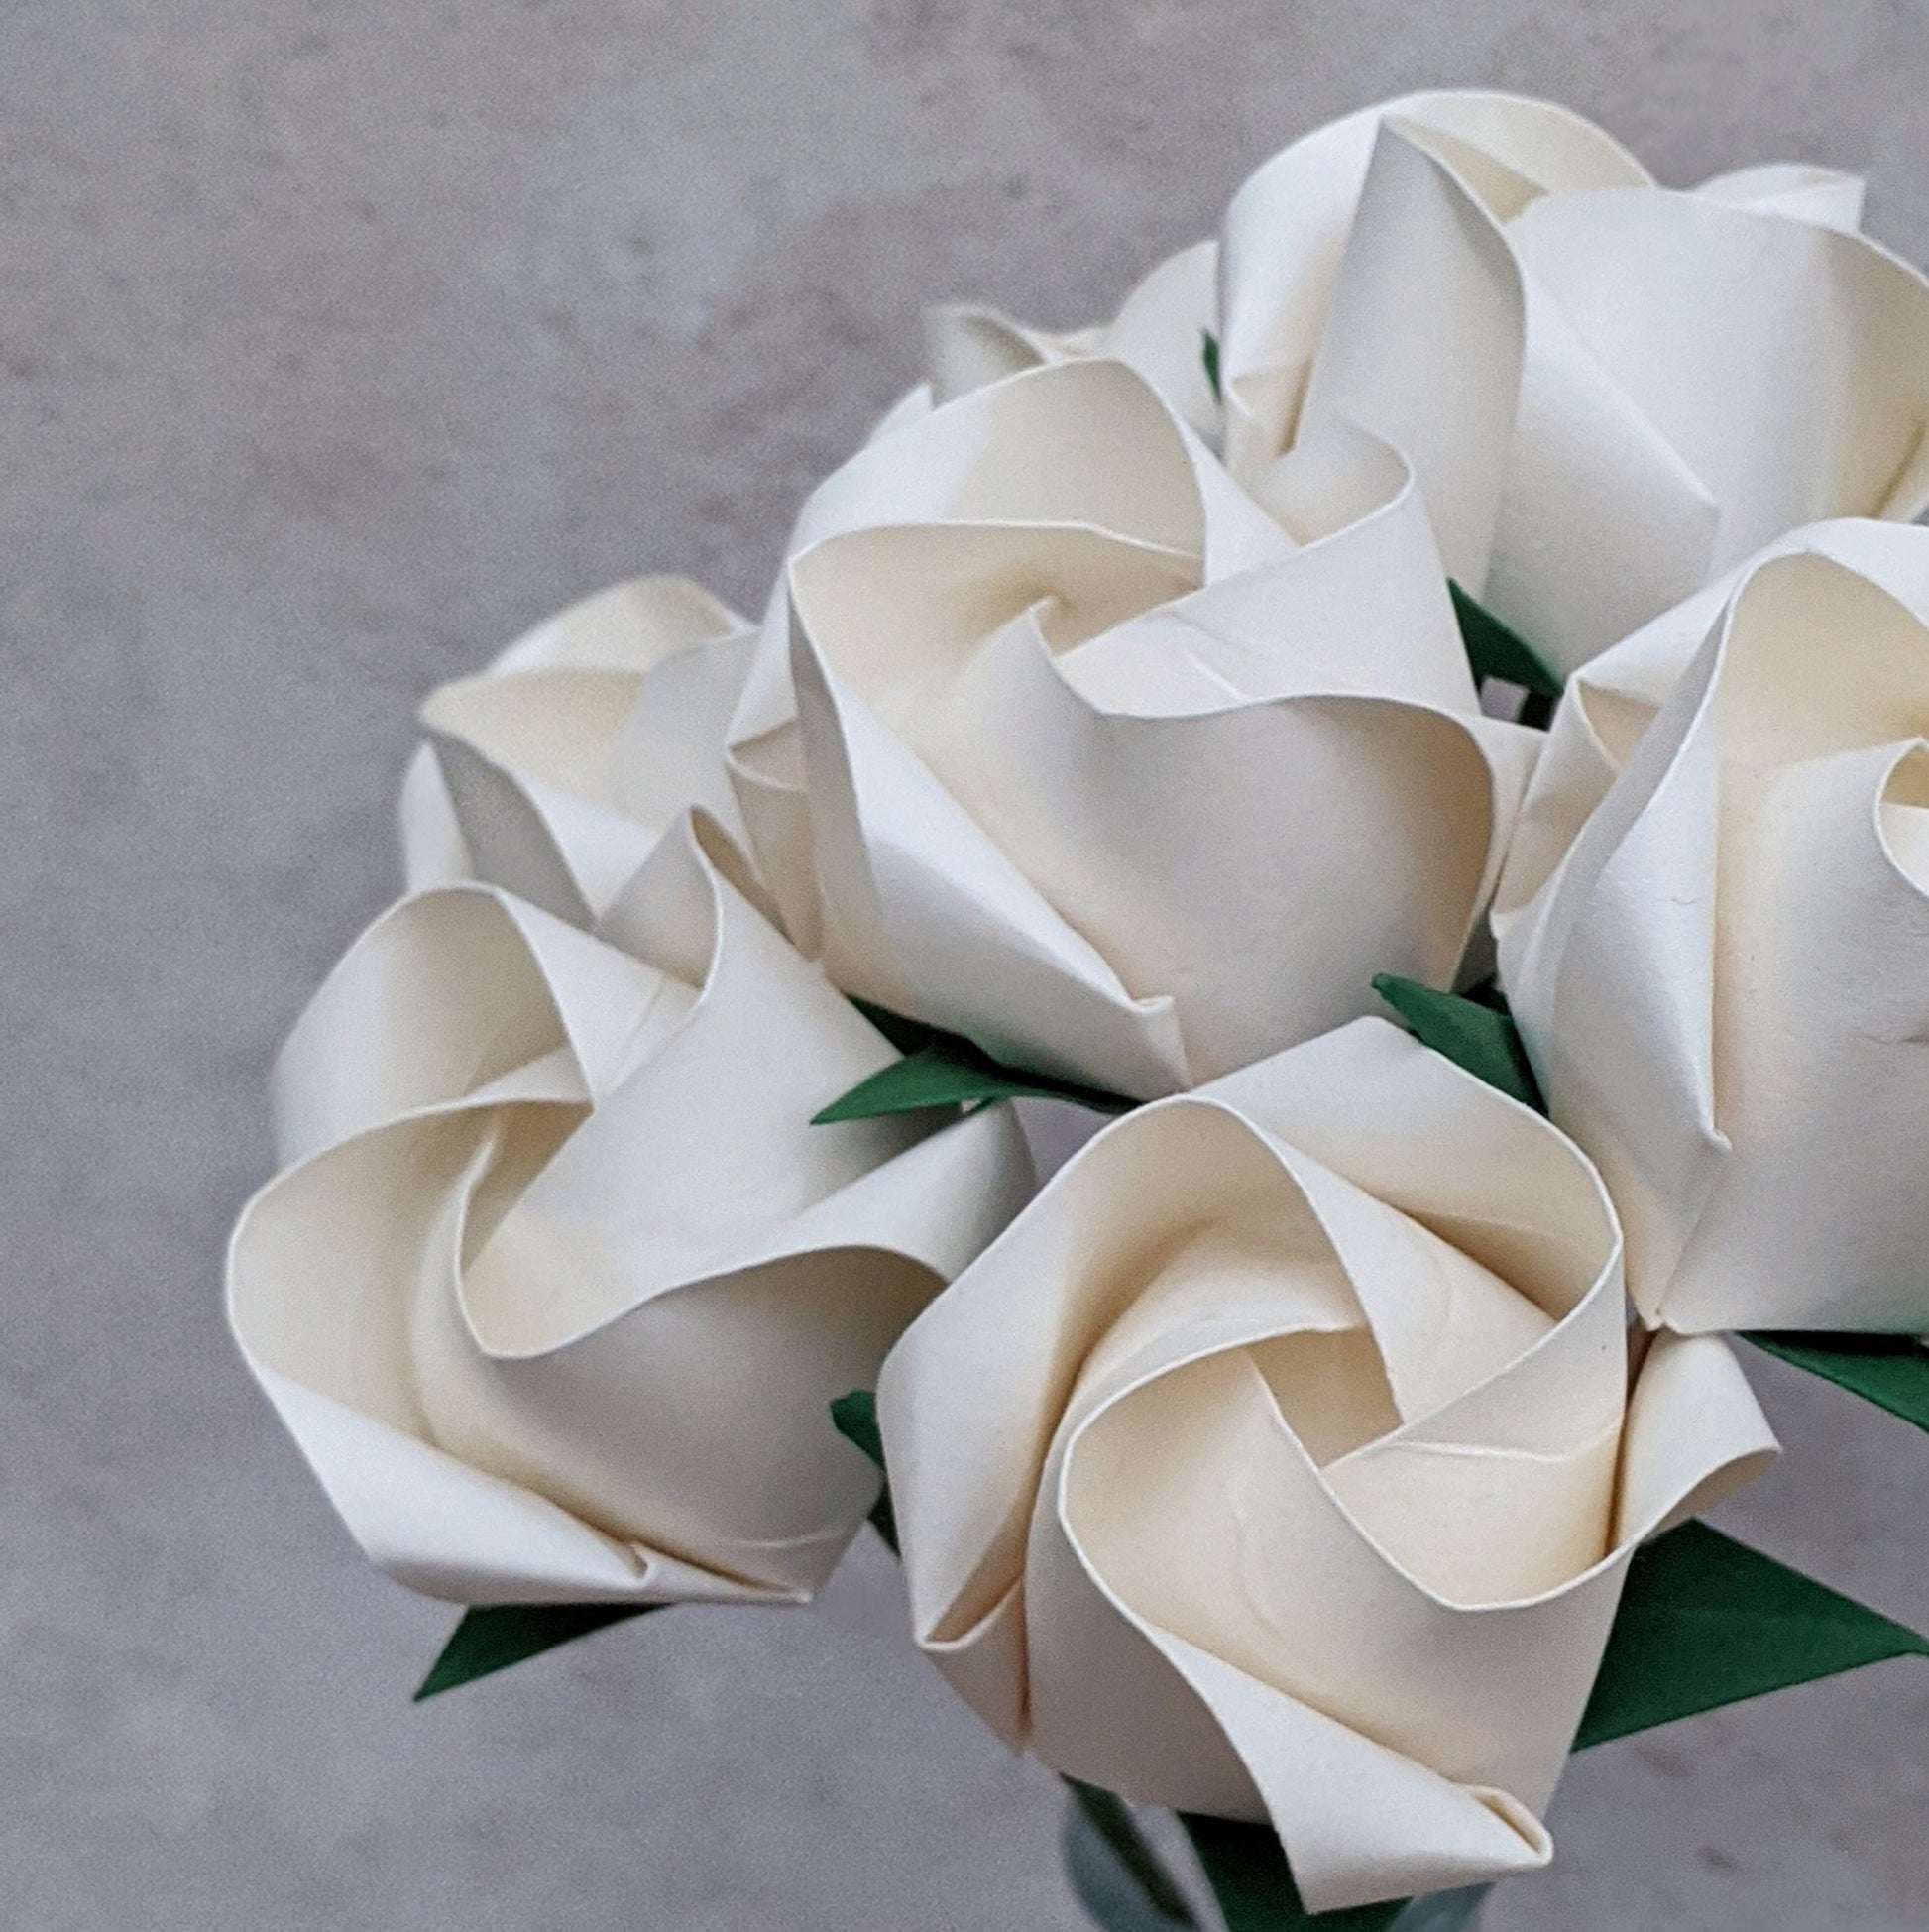 Bouquet of seven ivory origami roses folded from recycled paper 